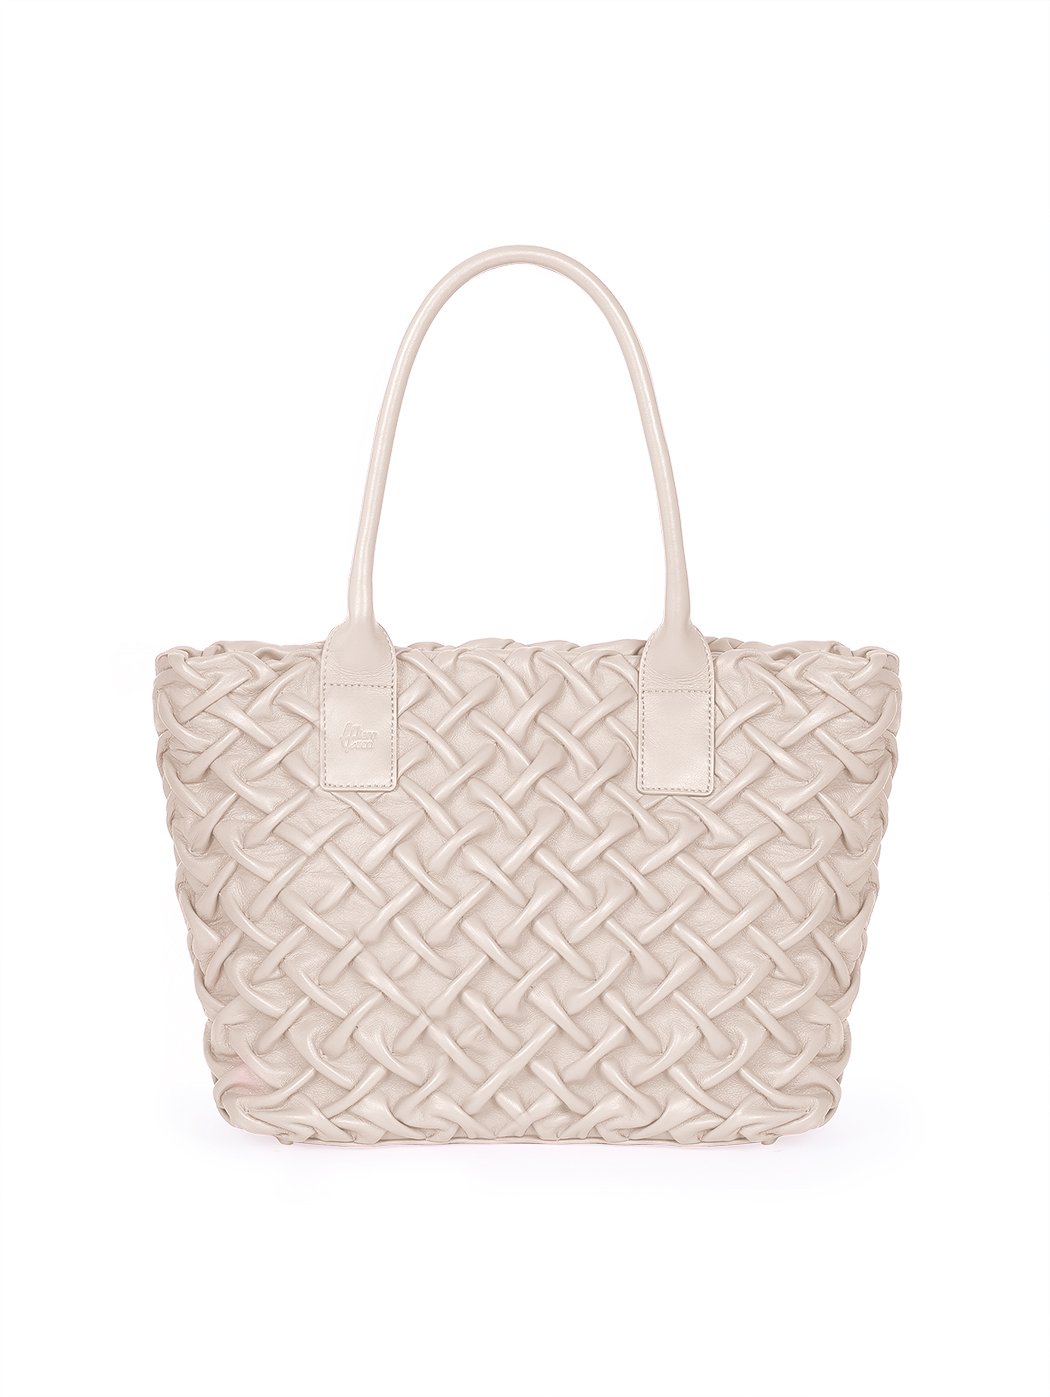 Quilted Weave Leather Satchel Tote Bag Beige